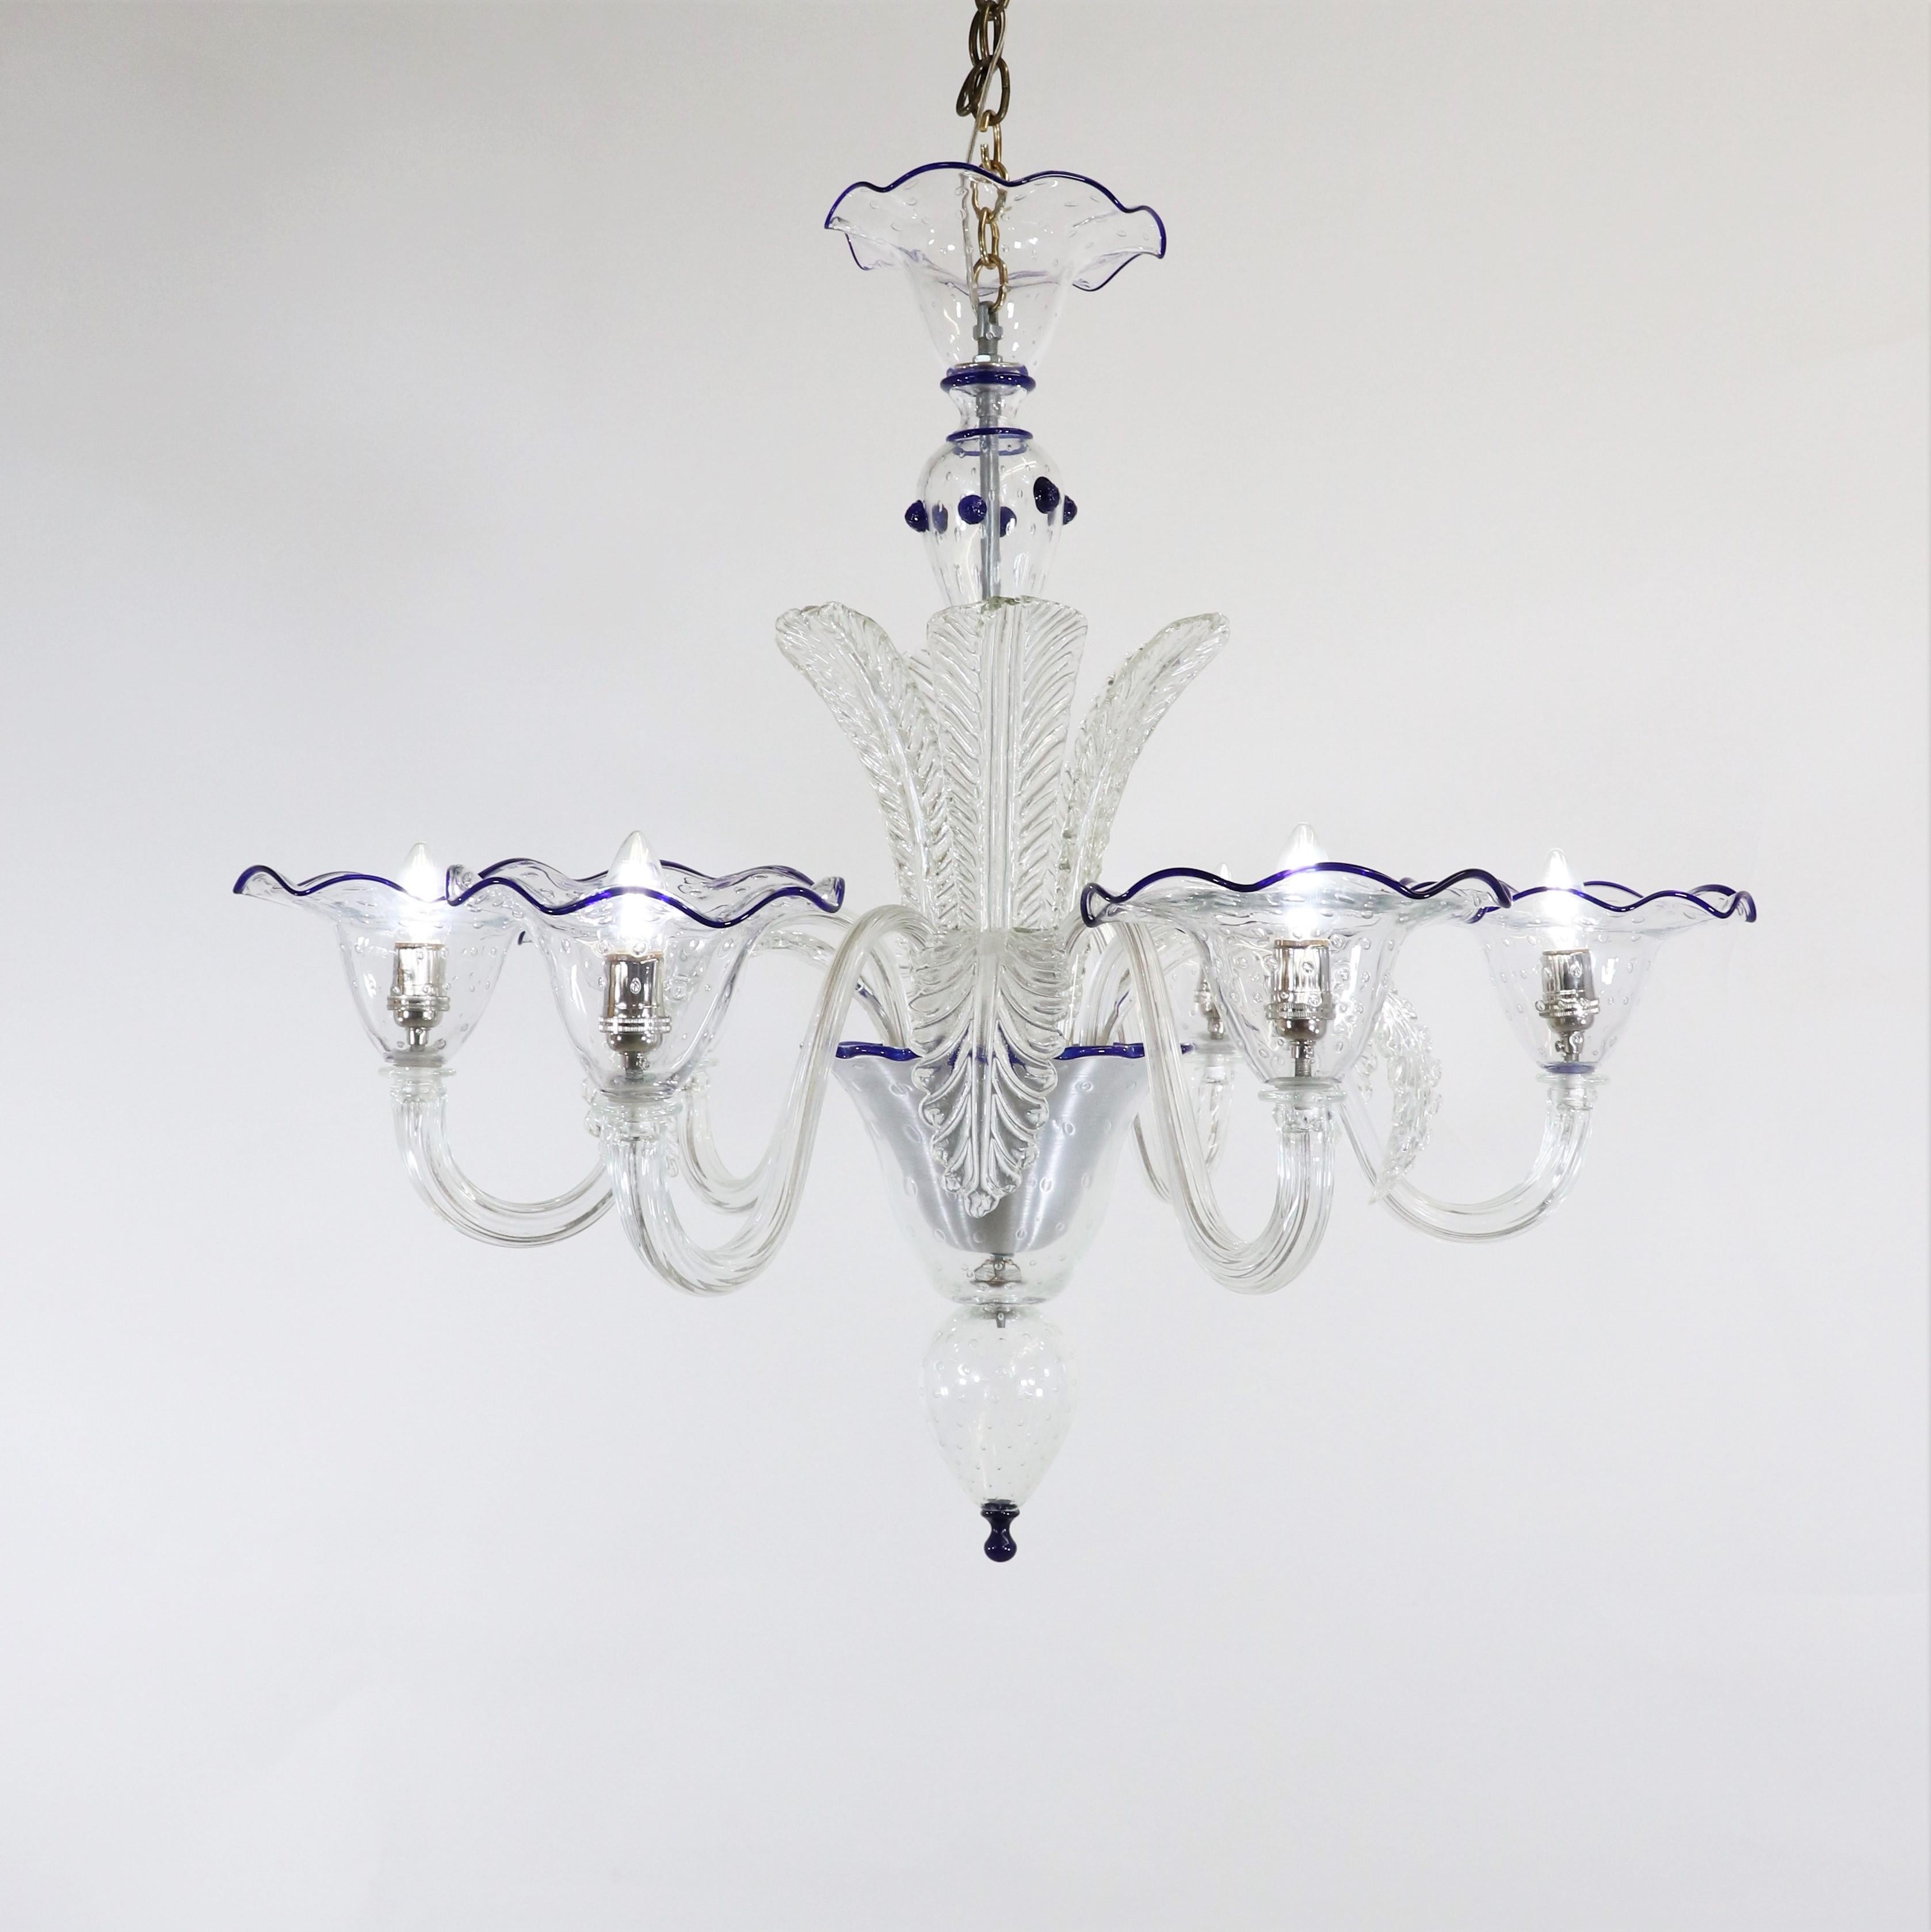 Experience the historical grandeur of this Baroque-inspired modern interpretation Murano chandelier, featuring six gracefully scrolling arms, each adorned with generously sized cups and sprouting fronds at its center. The chandelier's luminous,